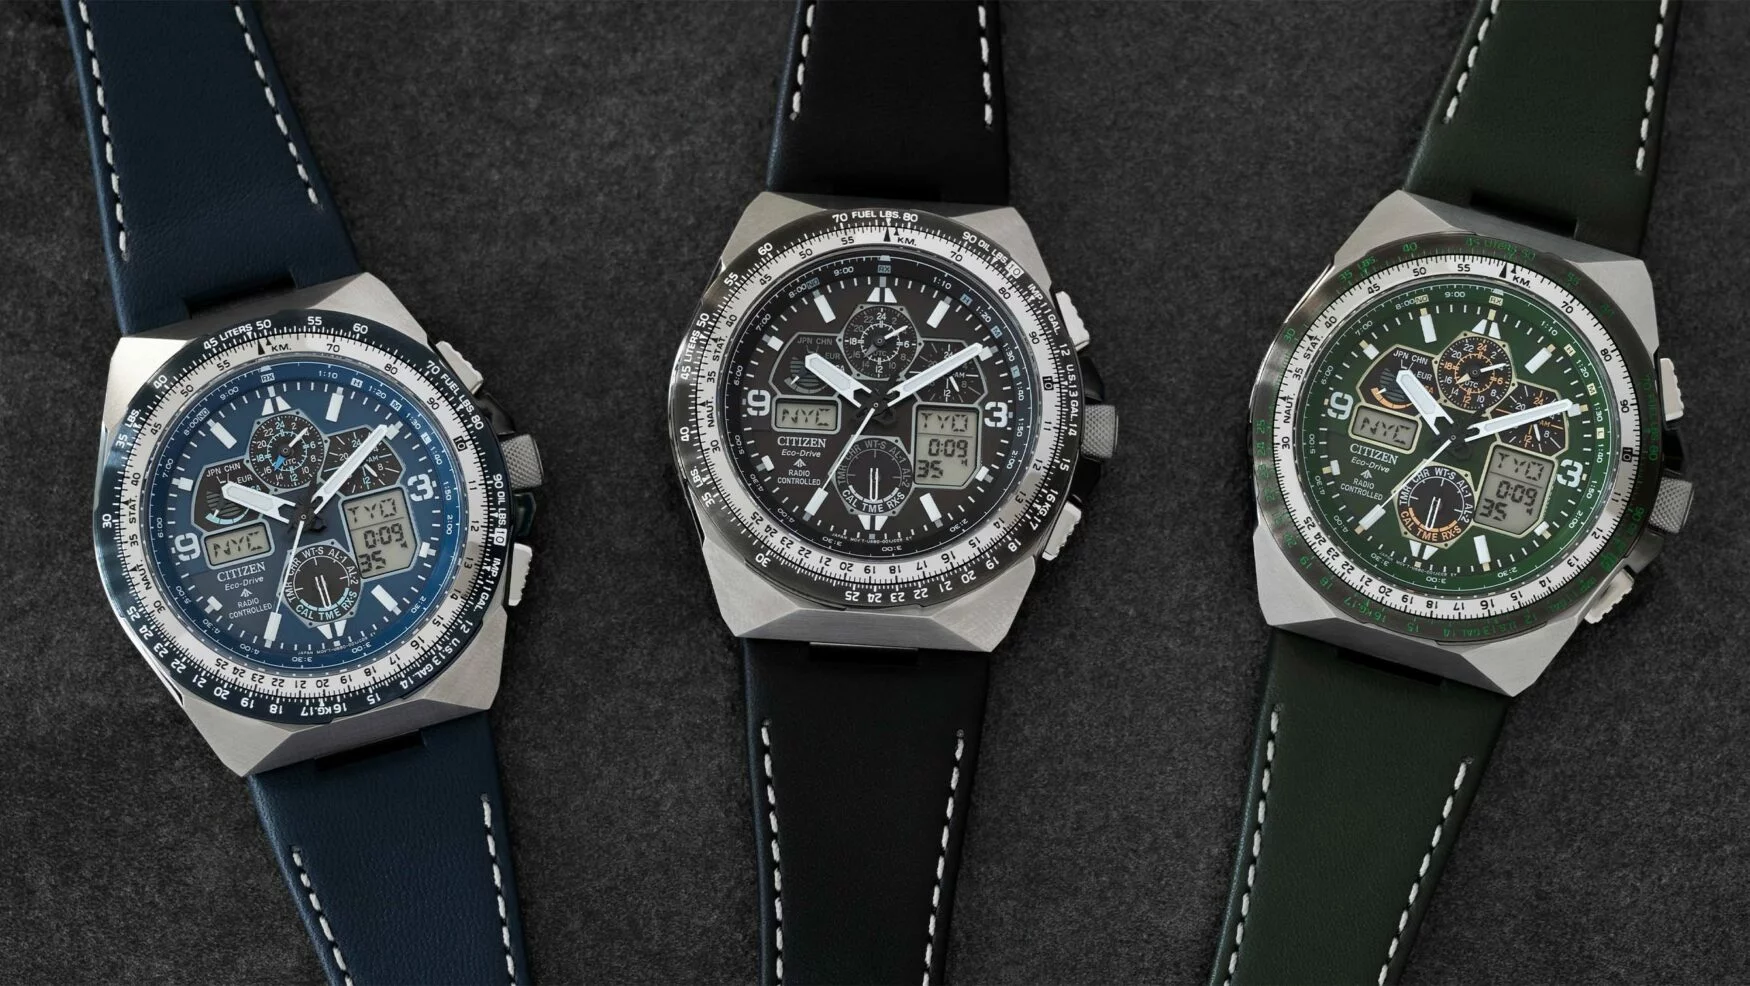 The value-driven Citizen NJ015 collection is finally set to hit